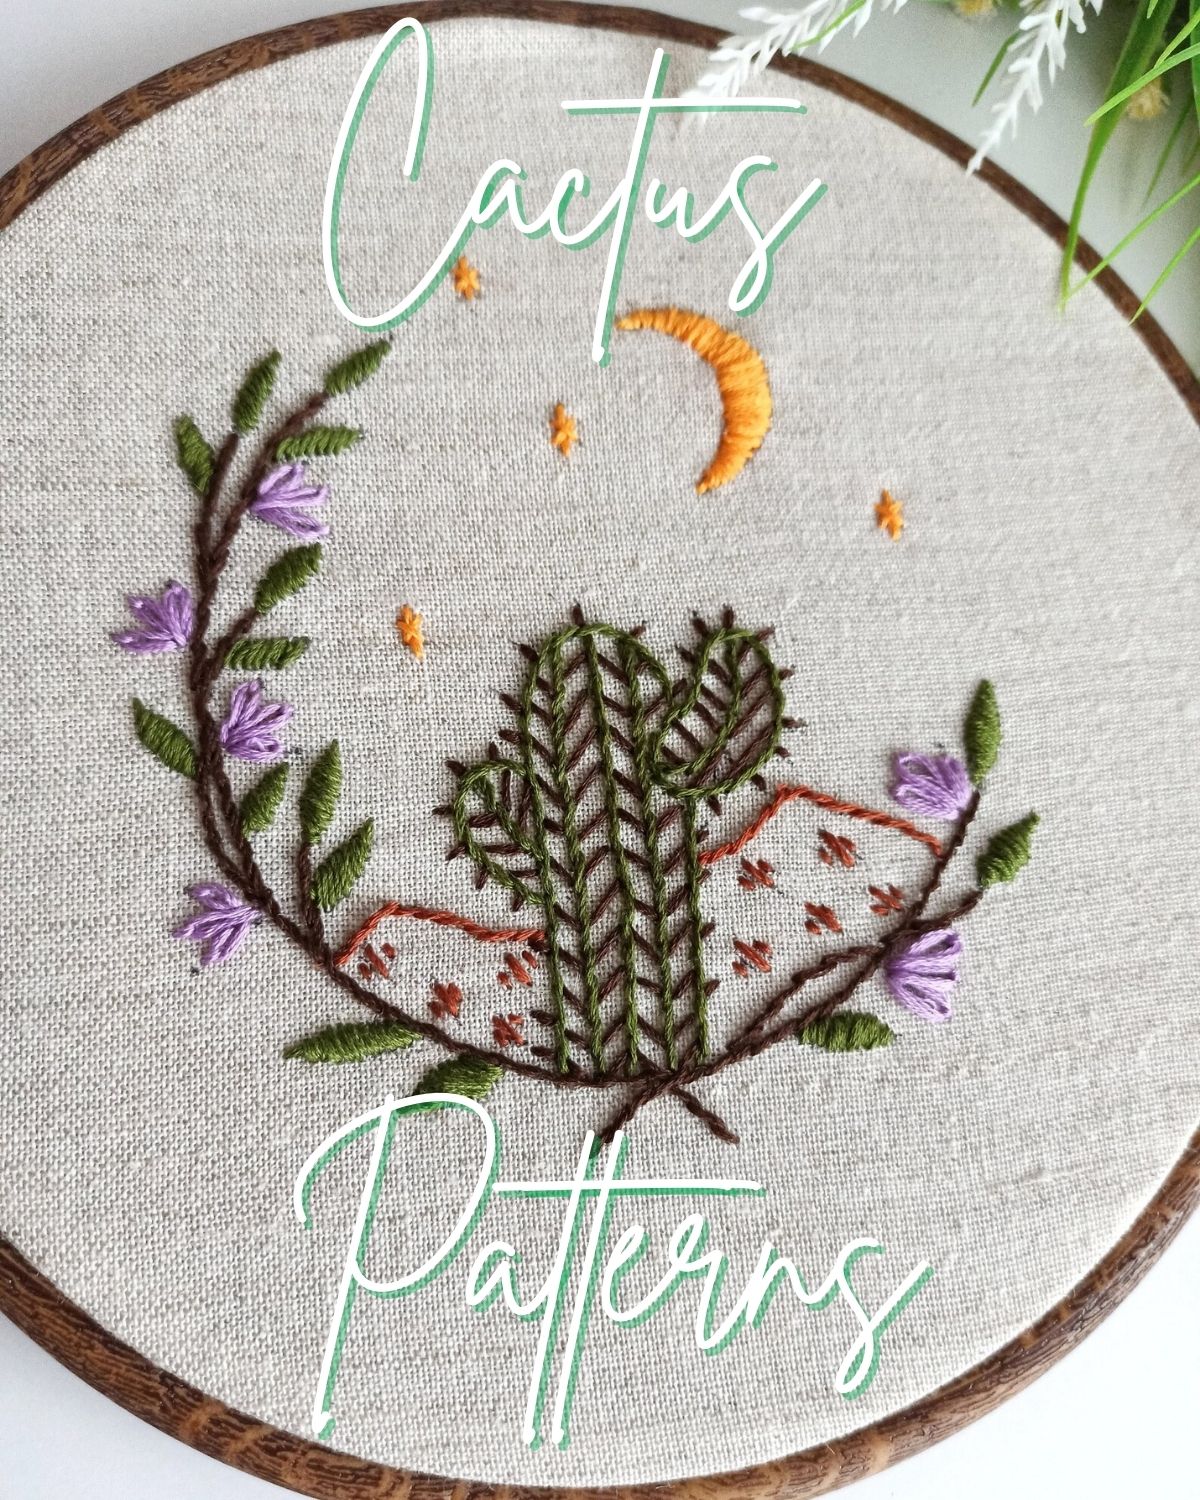 A cactus and a moon embroidery piece